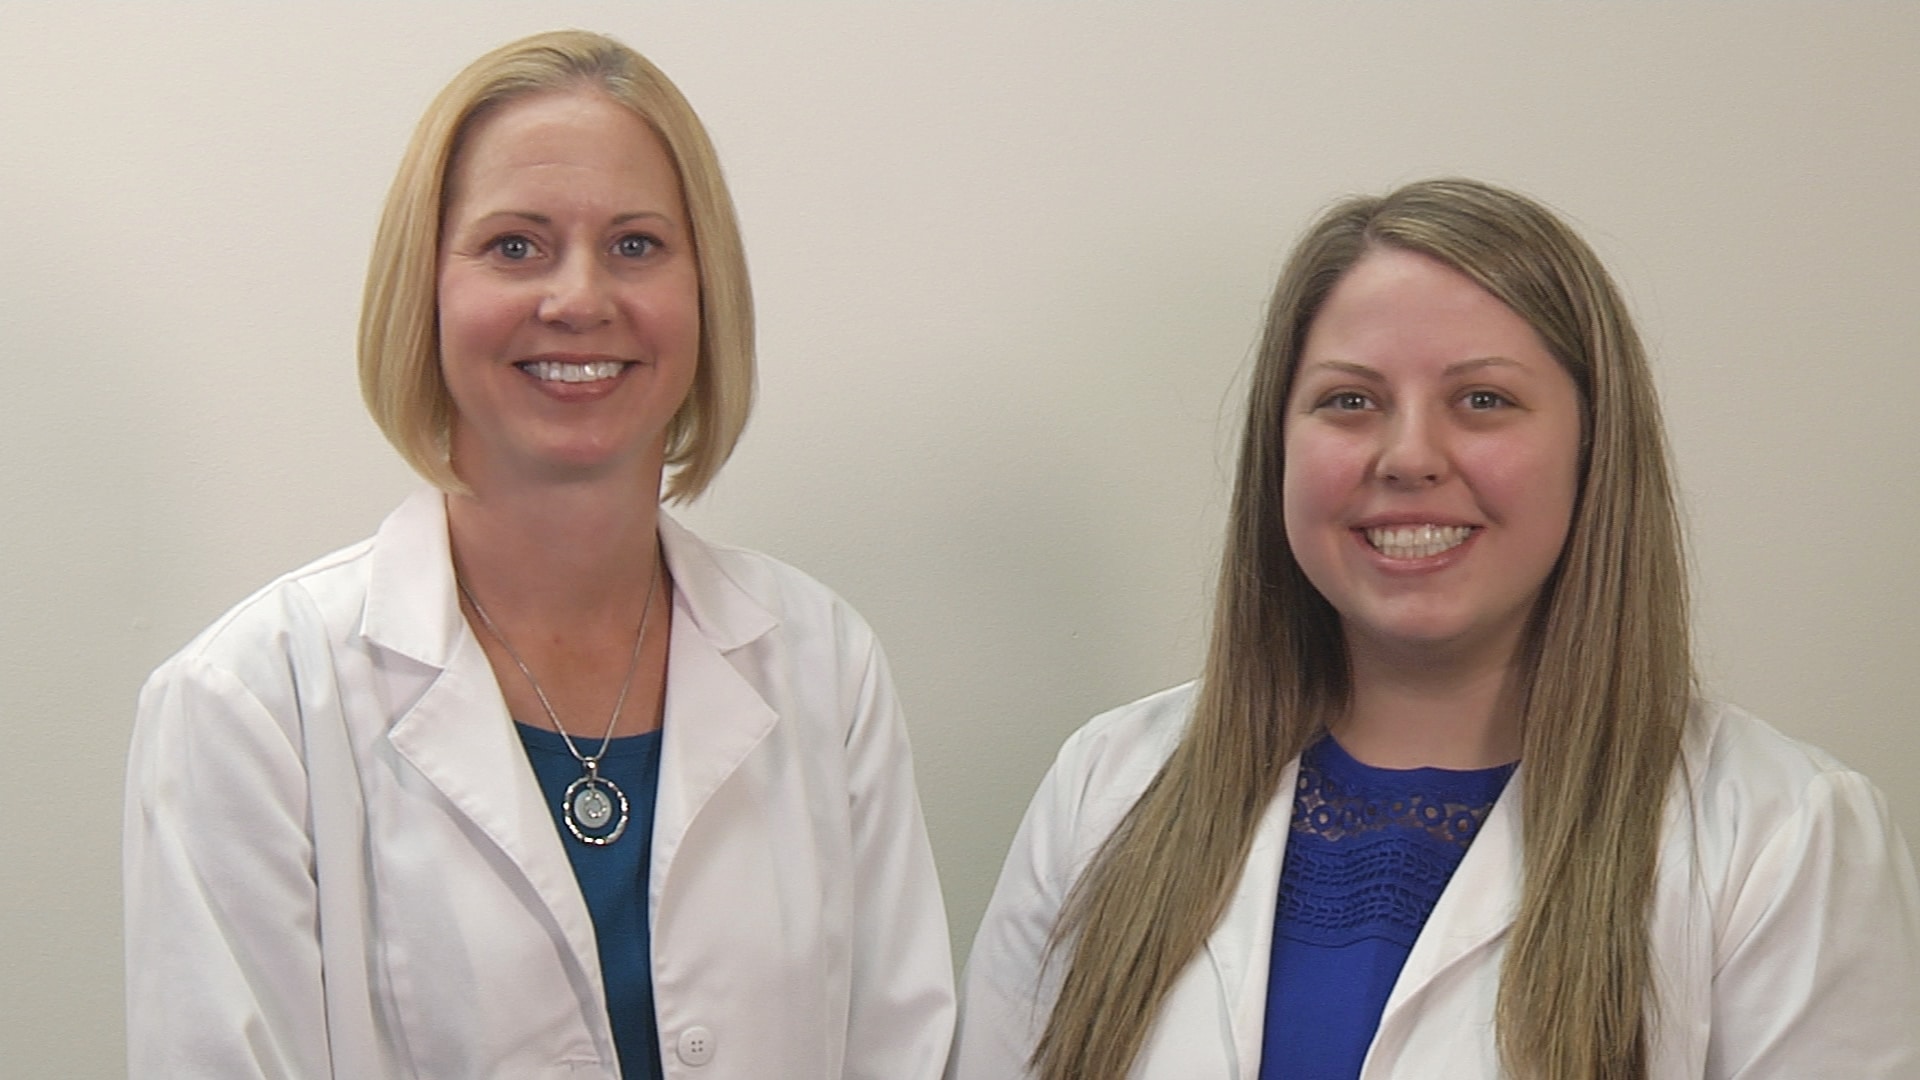 Our audiologists, Dr. Linda Wright and Dr. Jacklyn Miller